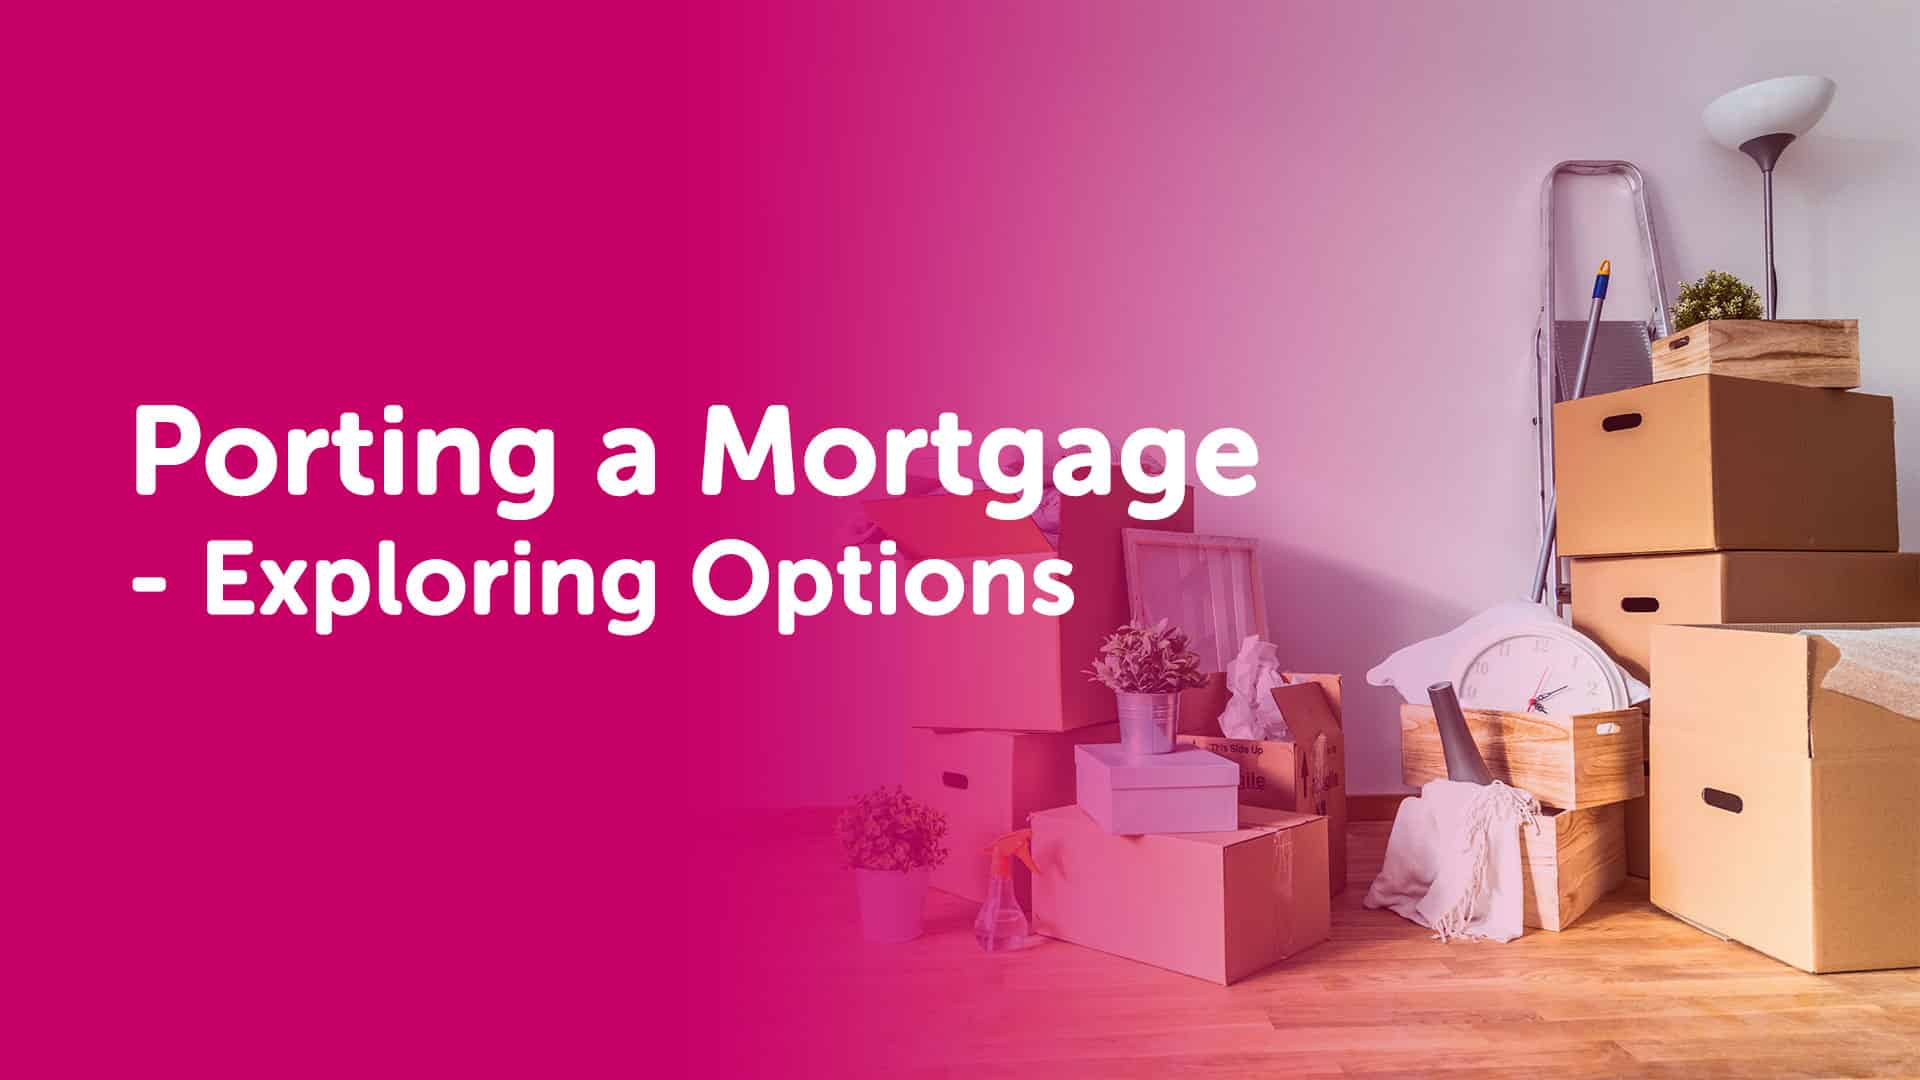 Porting a Mortgage in Manchester